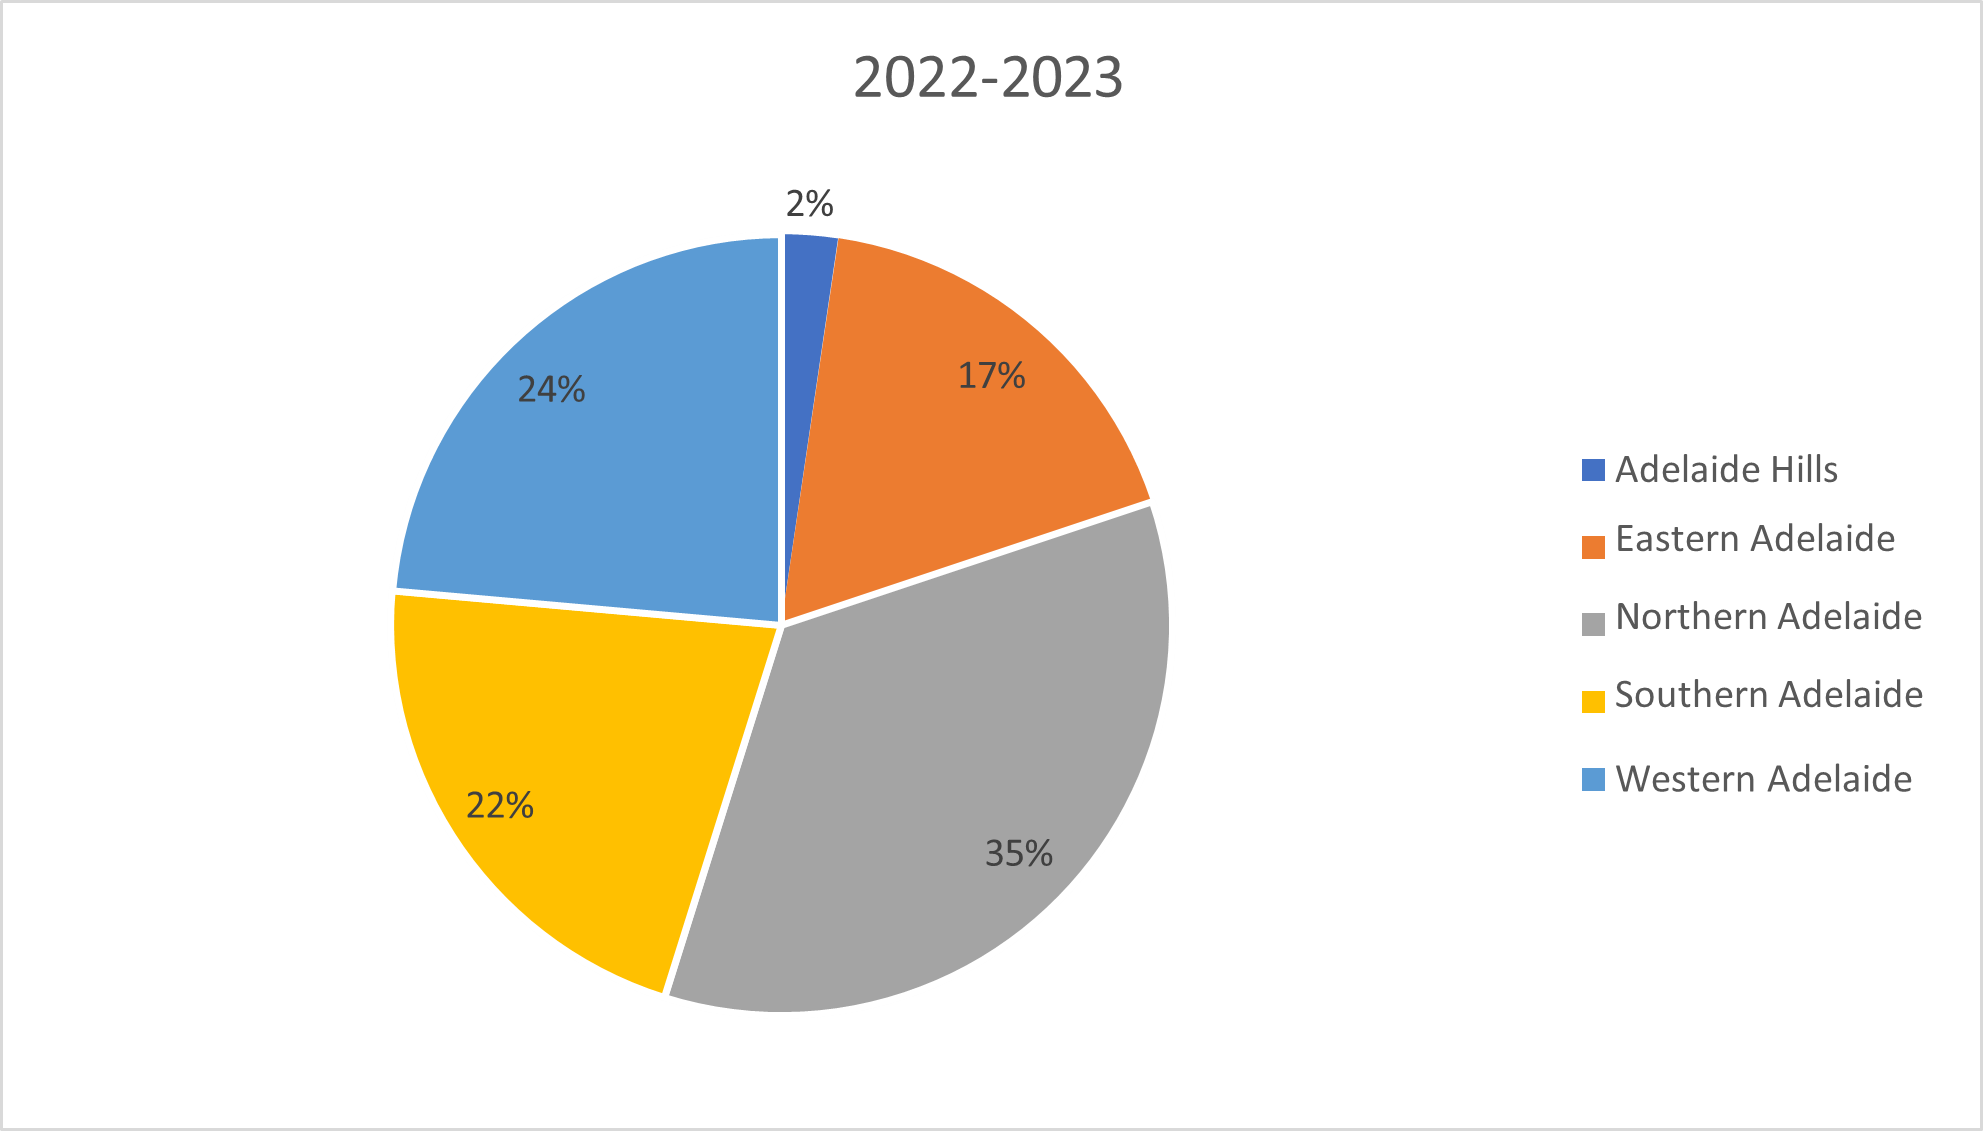 Pie chart showing the spread of metropolitan on-site plumbing installation audits for 2022-2023. Adelaide Hills 2%. Eastern Adelaide 17%. Northern Adelaide 35%. Southern Adelaide 22%. Western Adelaide 24%. 